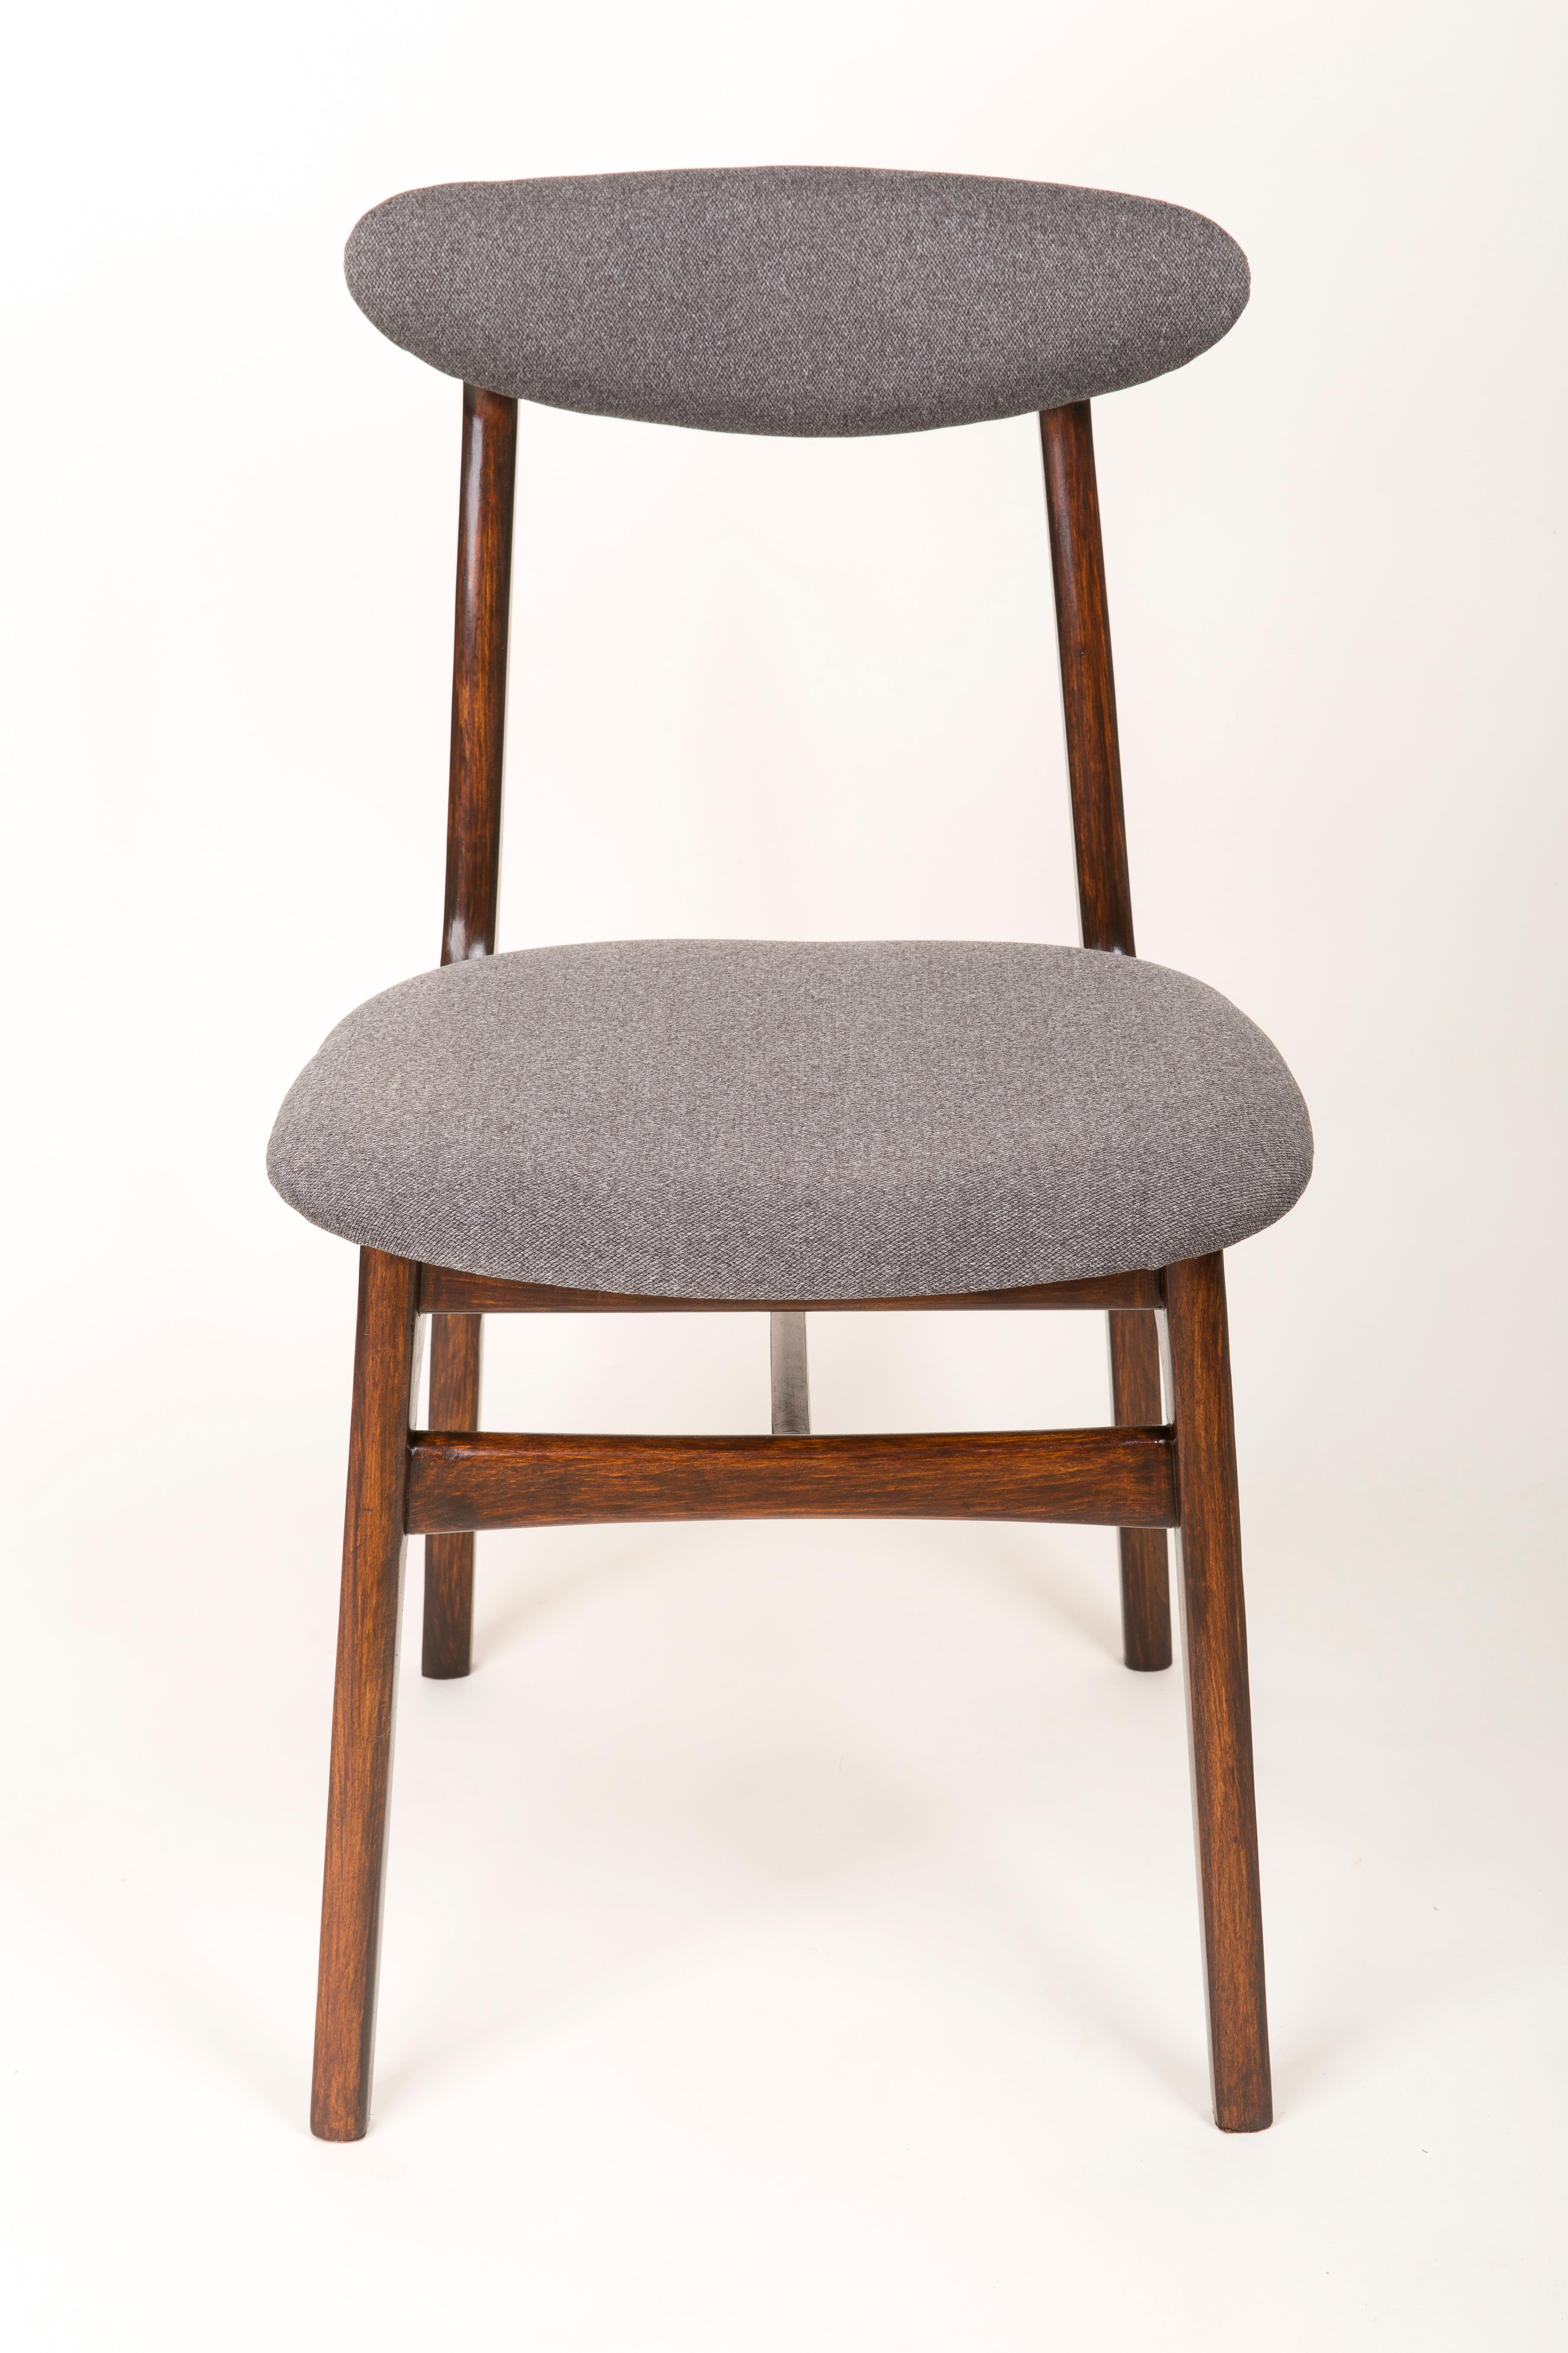 Textile Set of Four 20th Century Gray Chairs by Rajmund Halas, 1960s For Sale